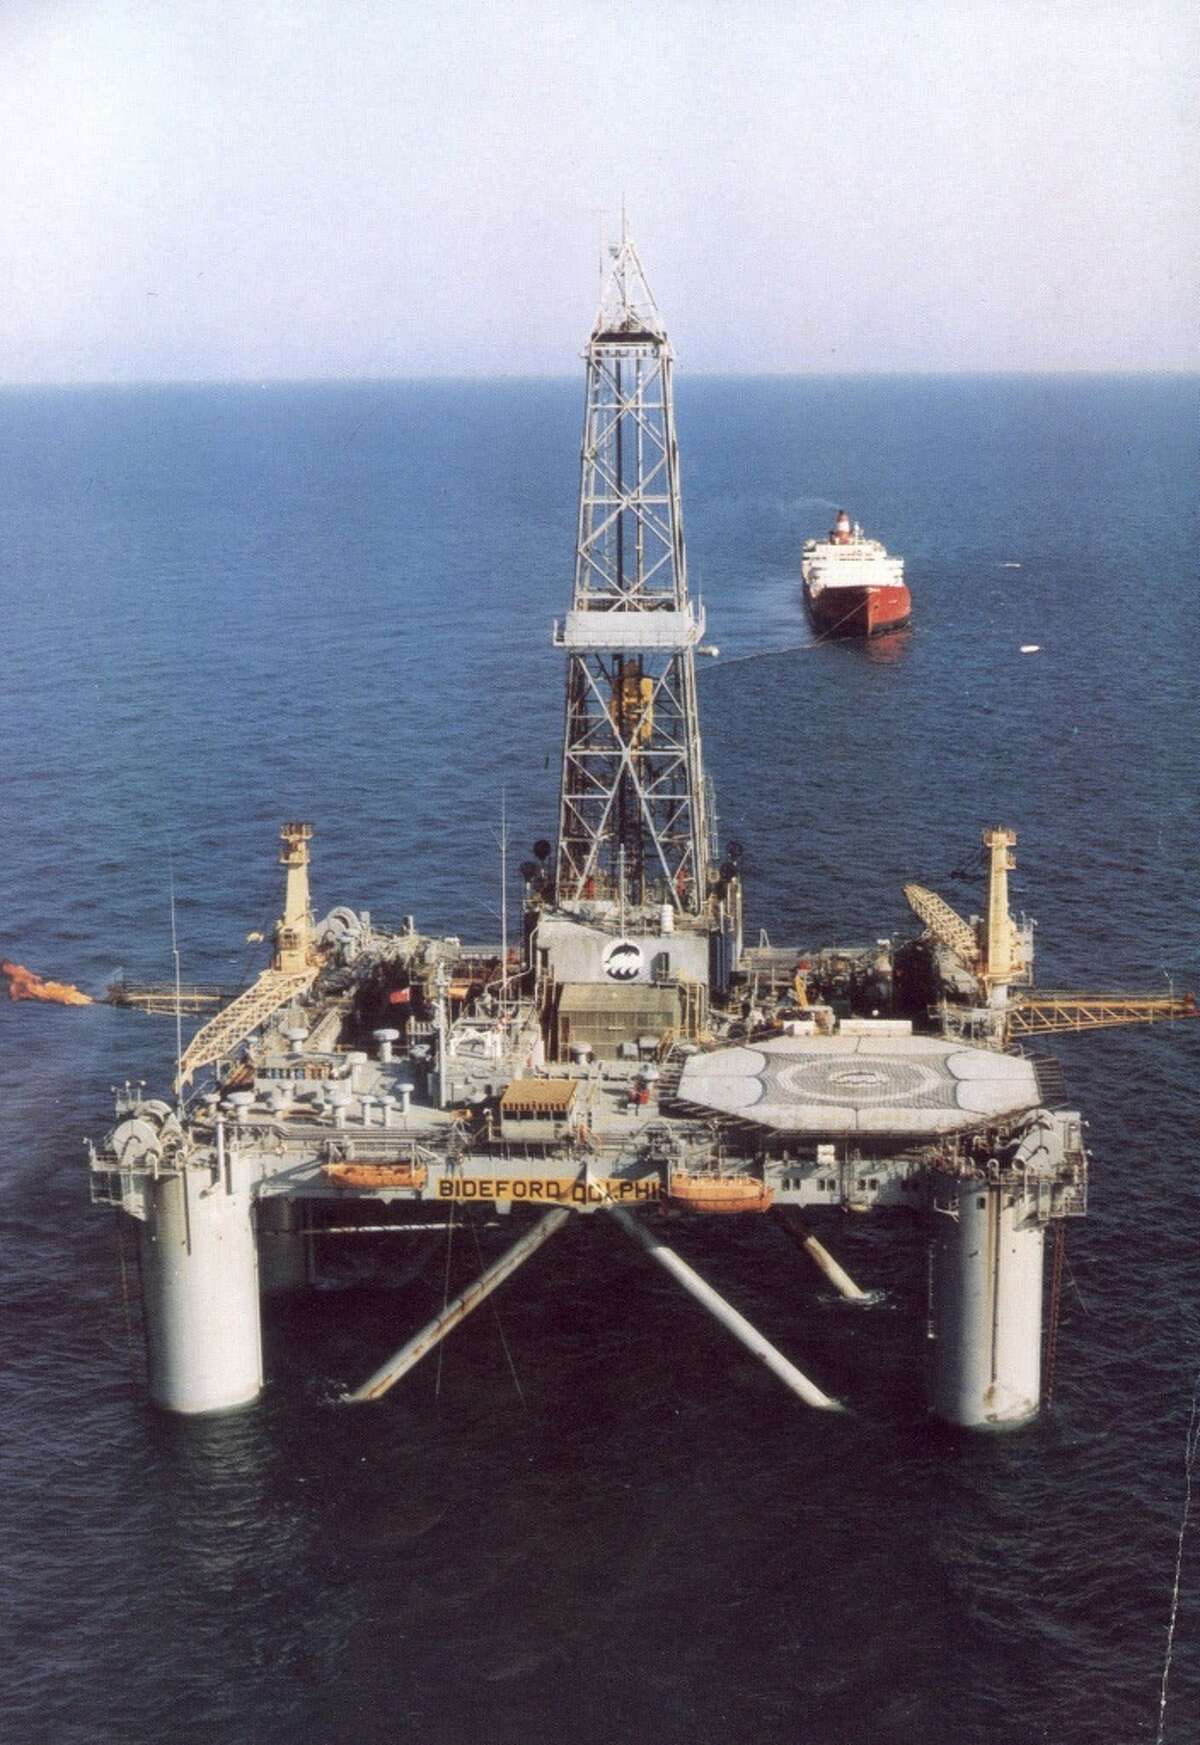 In this undated file photo, Norwegian oil rig "Bideford Dolphin" is seen in the Snorre oil field in the North Sea off the coast of Norway. Amid the rough undercurrents of economic and financial uncertainty tugging at Europe, Norway is a rock-solid island of the blessed. Because it is outside the European Union, it does not have to contribute to bailouts of Greece and other foundering eurozone nations. And if all that were not enough, one of Europe's most prosperous nations is about to get richer _ two of its previous North Sea oil discoveries are substantially bigger than previously thought.